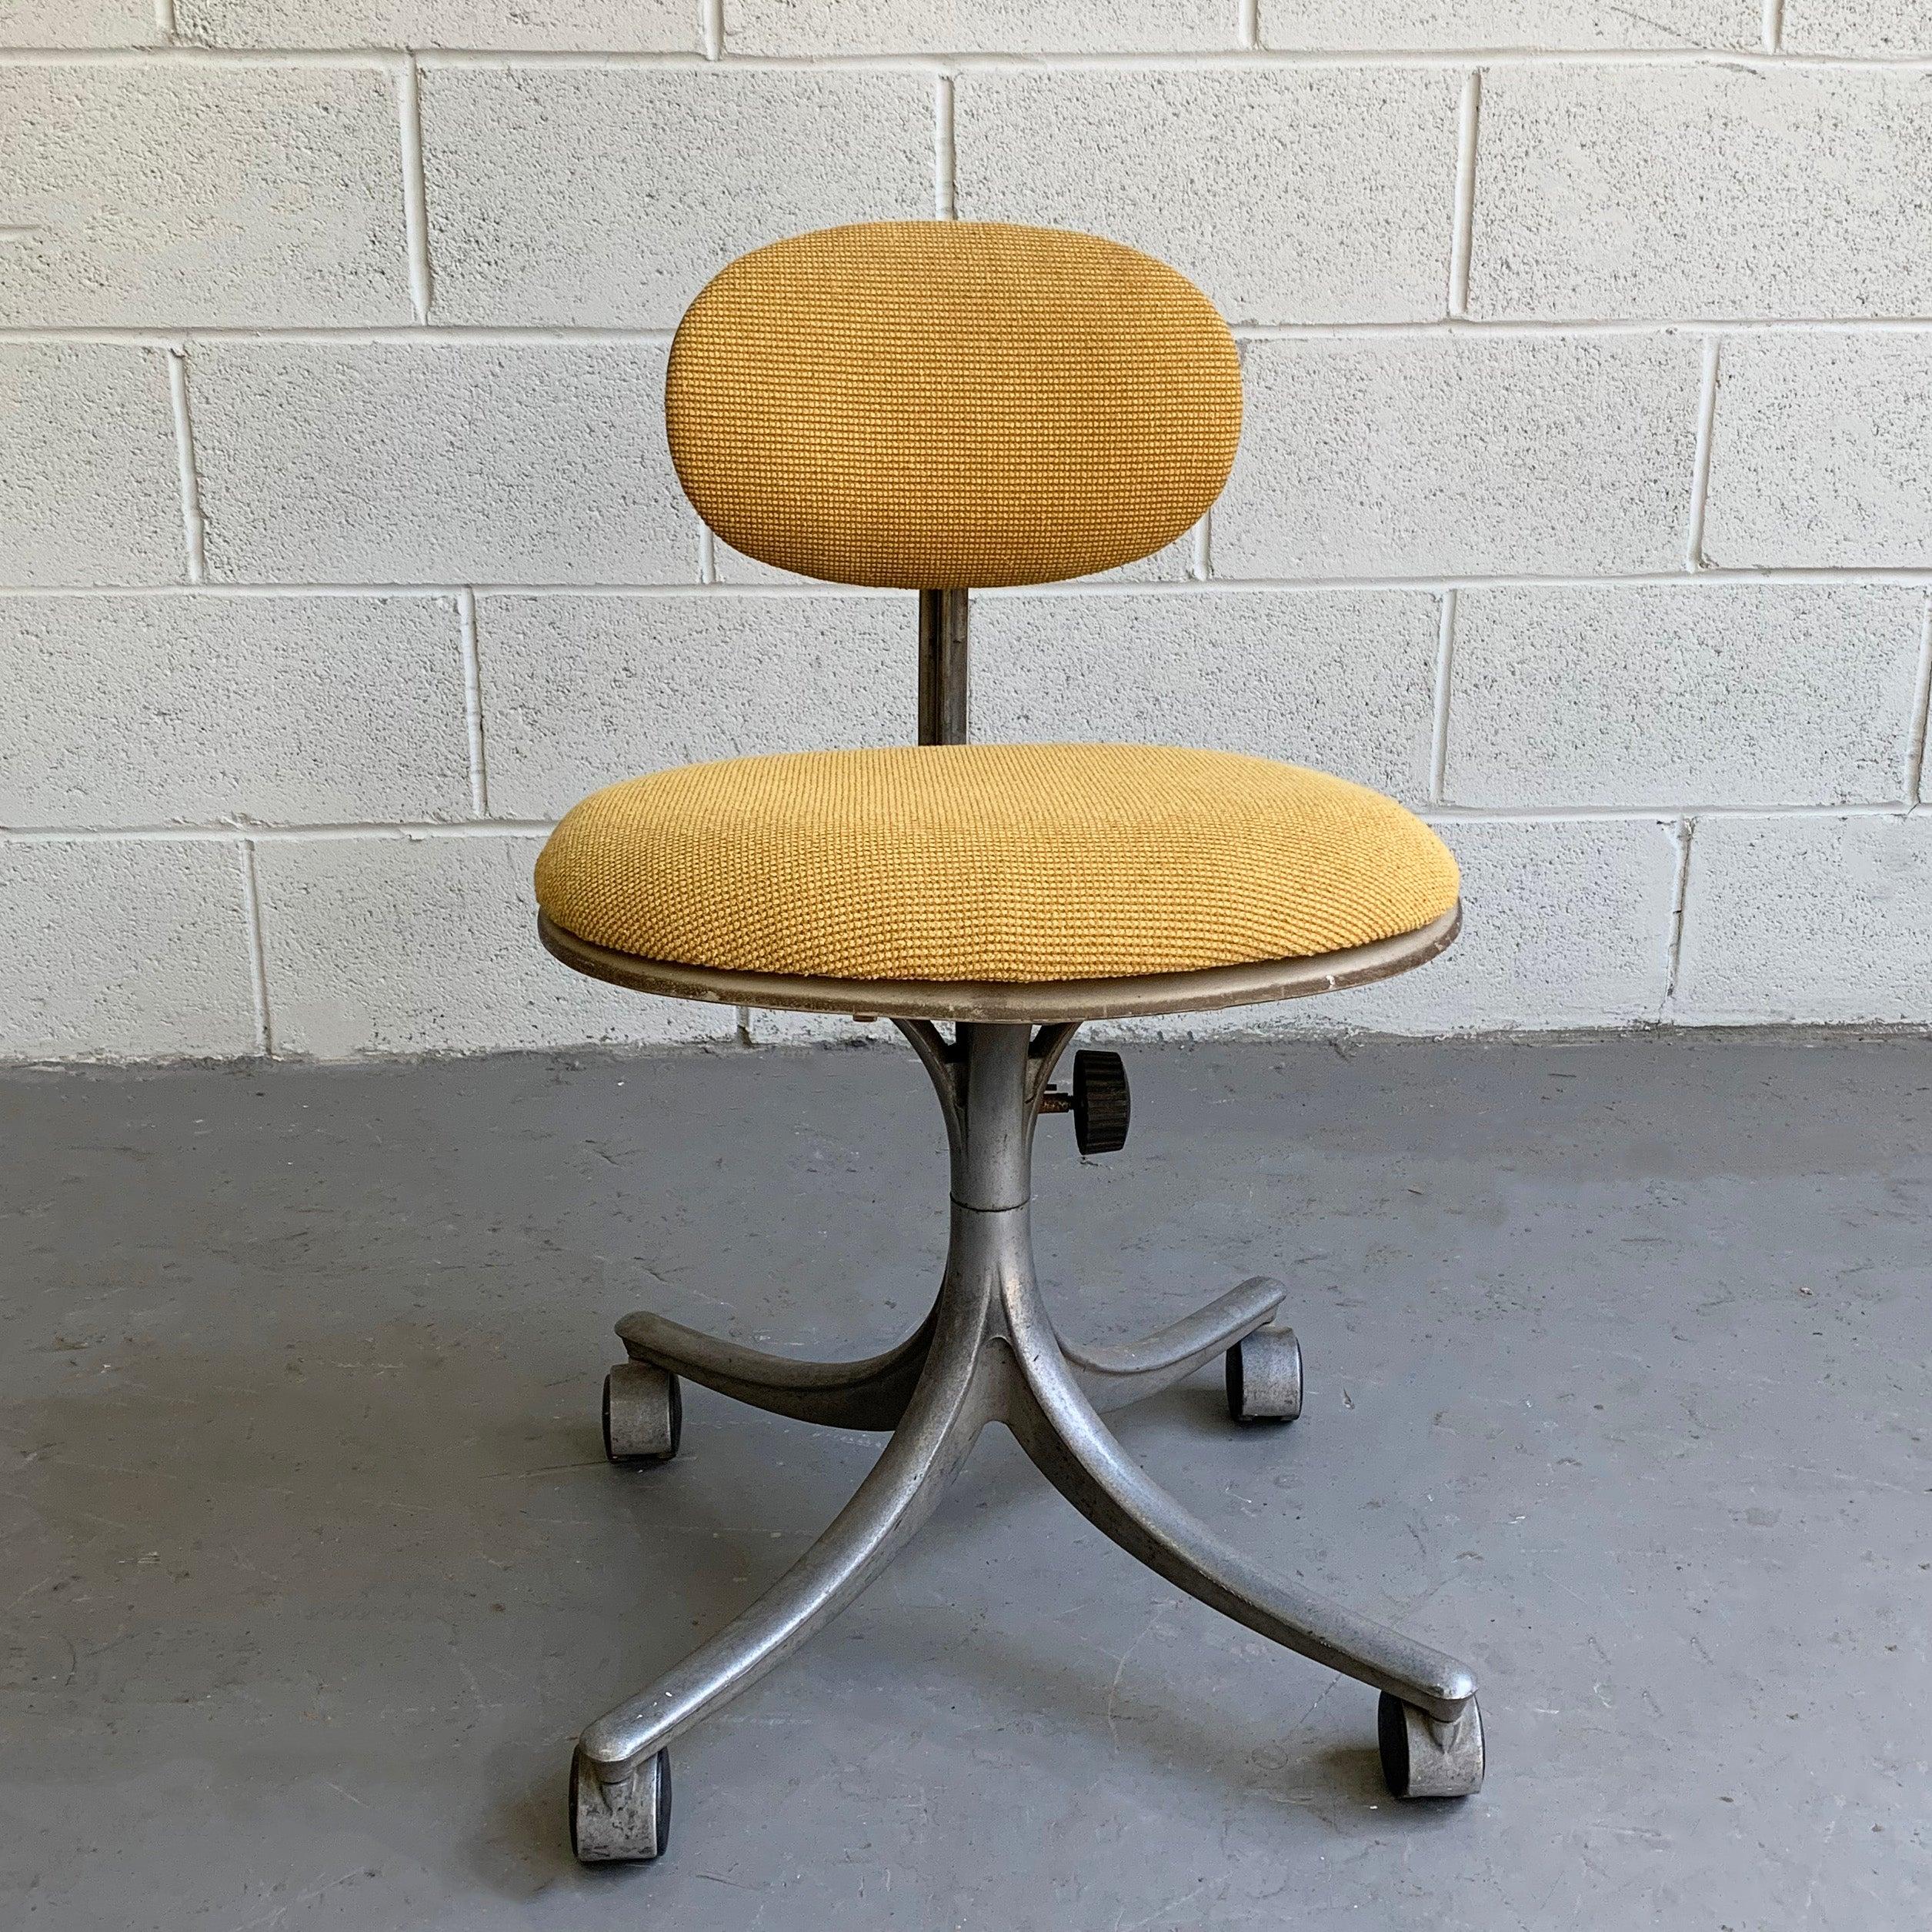 Mid-Century Modern, rolling, swivel, office task chair by Jorgen Rasmussen for Knoll features a light weight, aluminum frame with seat and back reupholstered in a yellow, woven cotton blend.